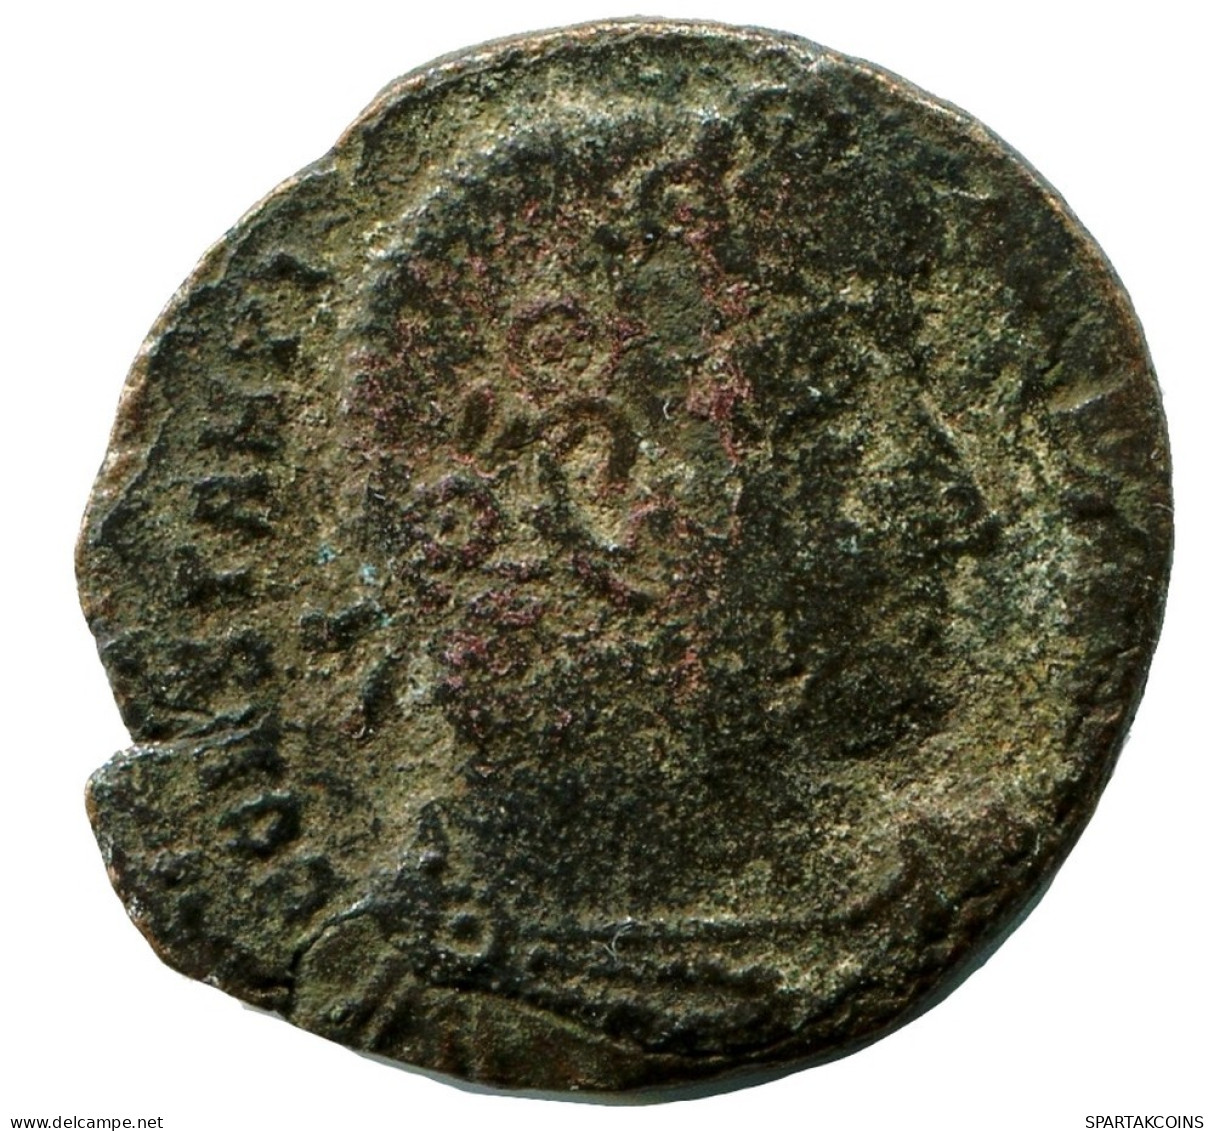 CONSTANTINE I MINTED IN ROME ITALY FROM THE ROYAL ONTARIO MUSEUM #ANC11169.14.F.A - Der Christlischen Kaiser (307 / 363)